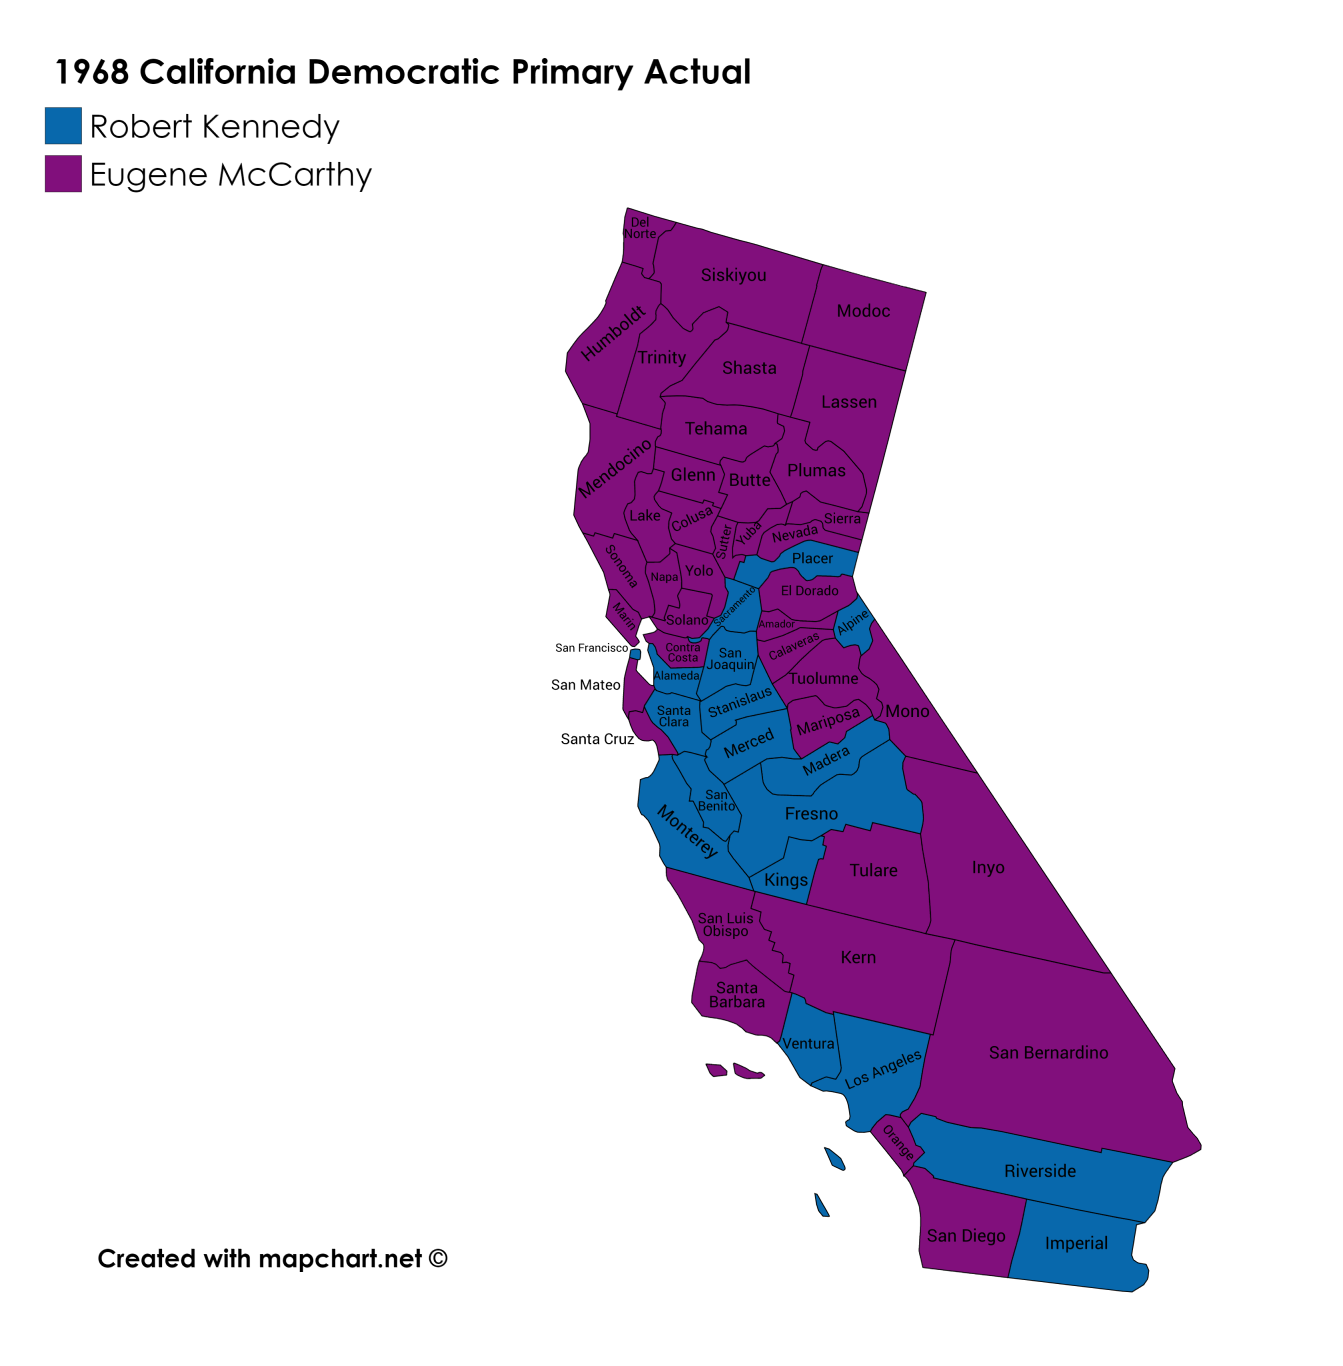 1968 California Democratic Primary Actual cropped.png